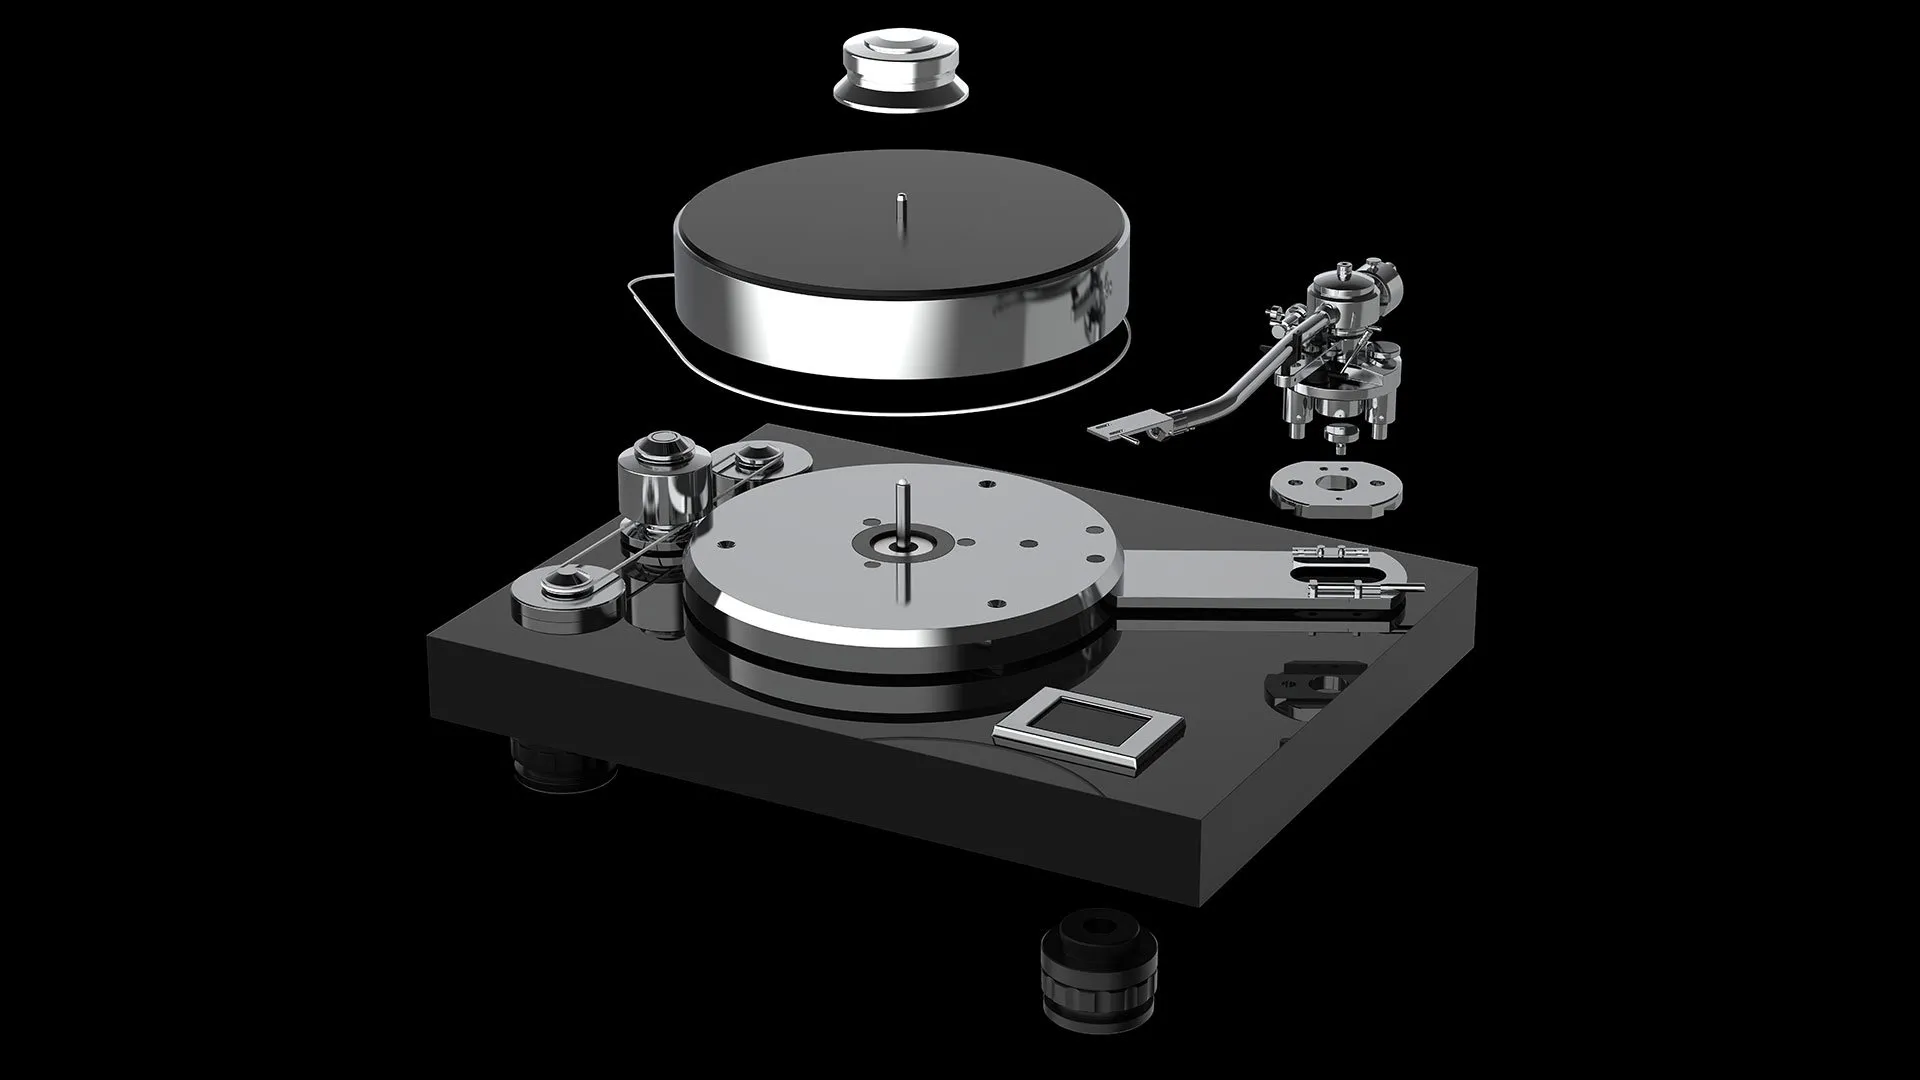 Pro-Ject Signature 12 Audiophile Turntable Exploded View